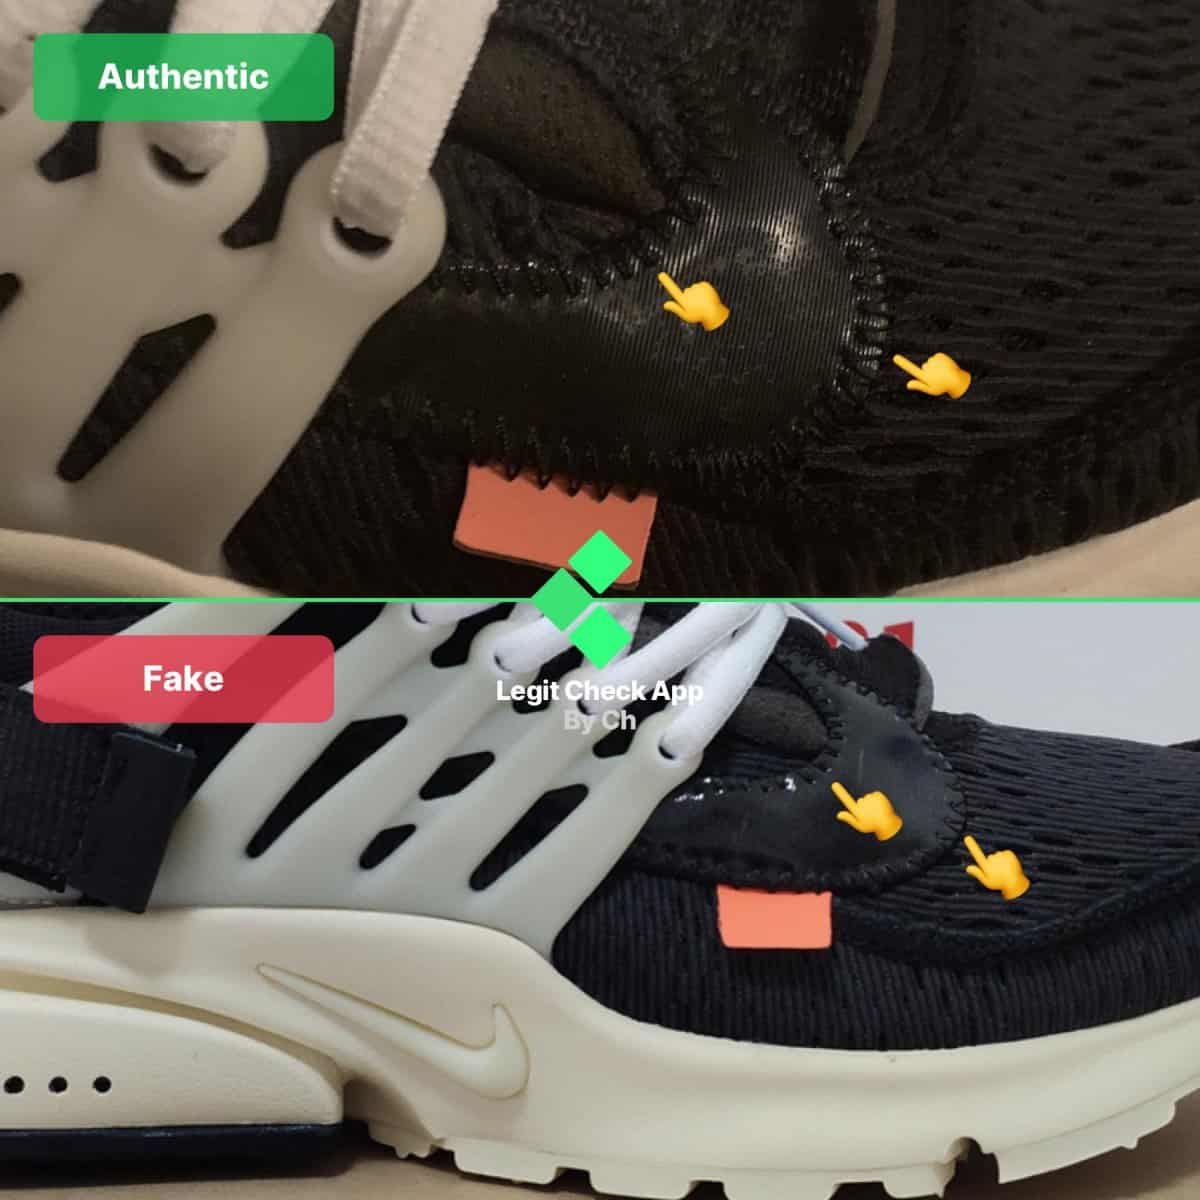 how to spot fake off-white presto by swoosh stitching